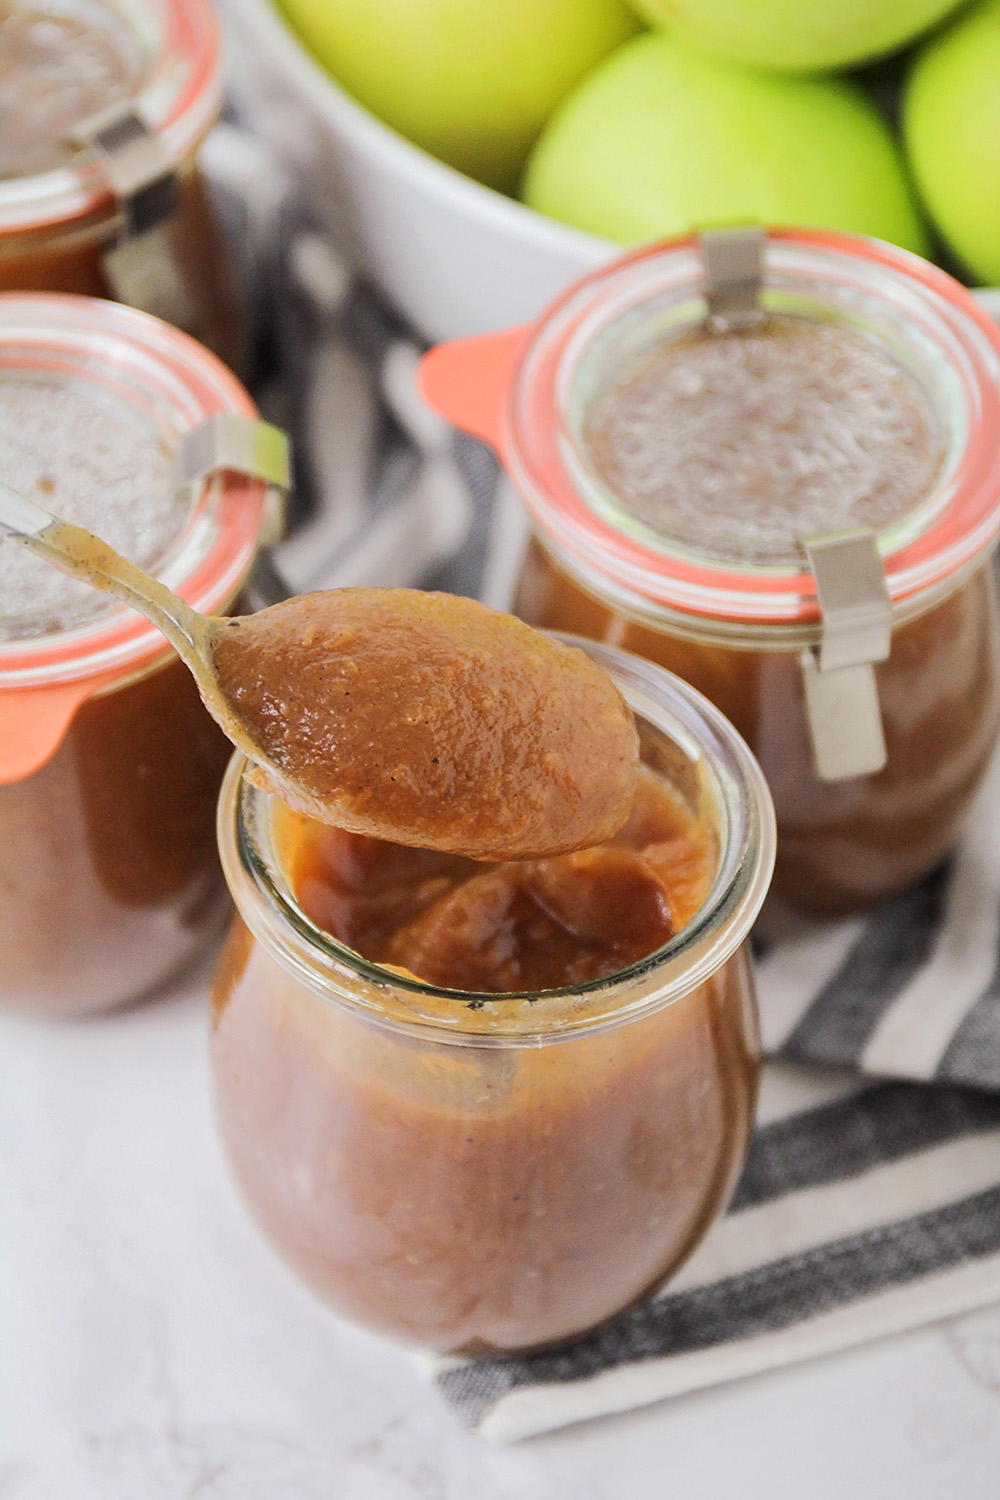 This instant pot apple butter tastes fantastic and is so quick and easy to make!